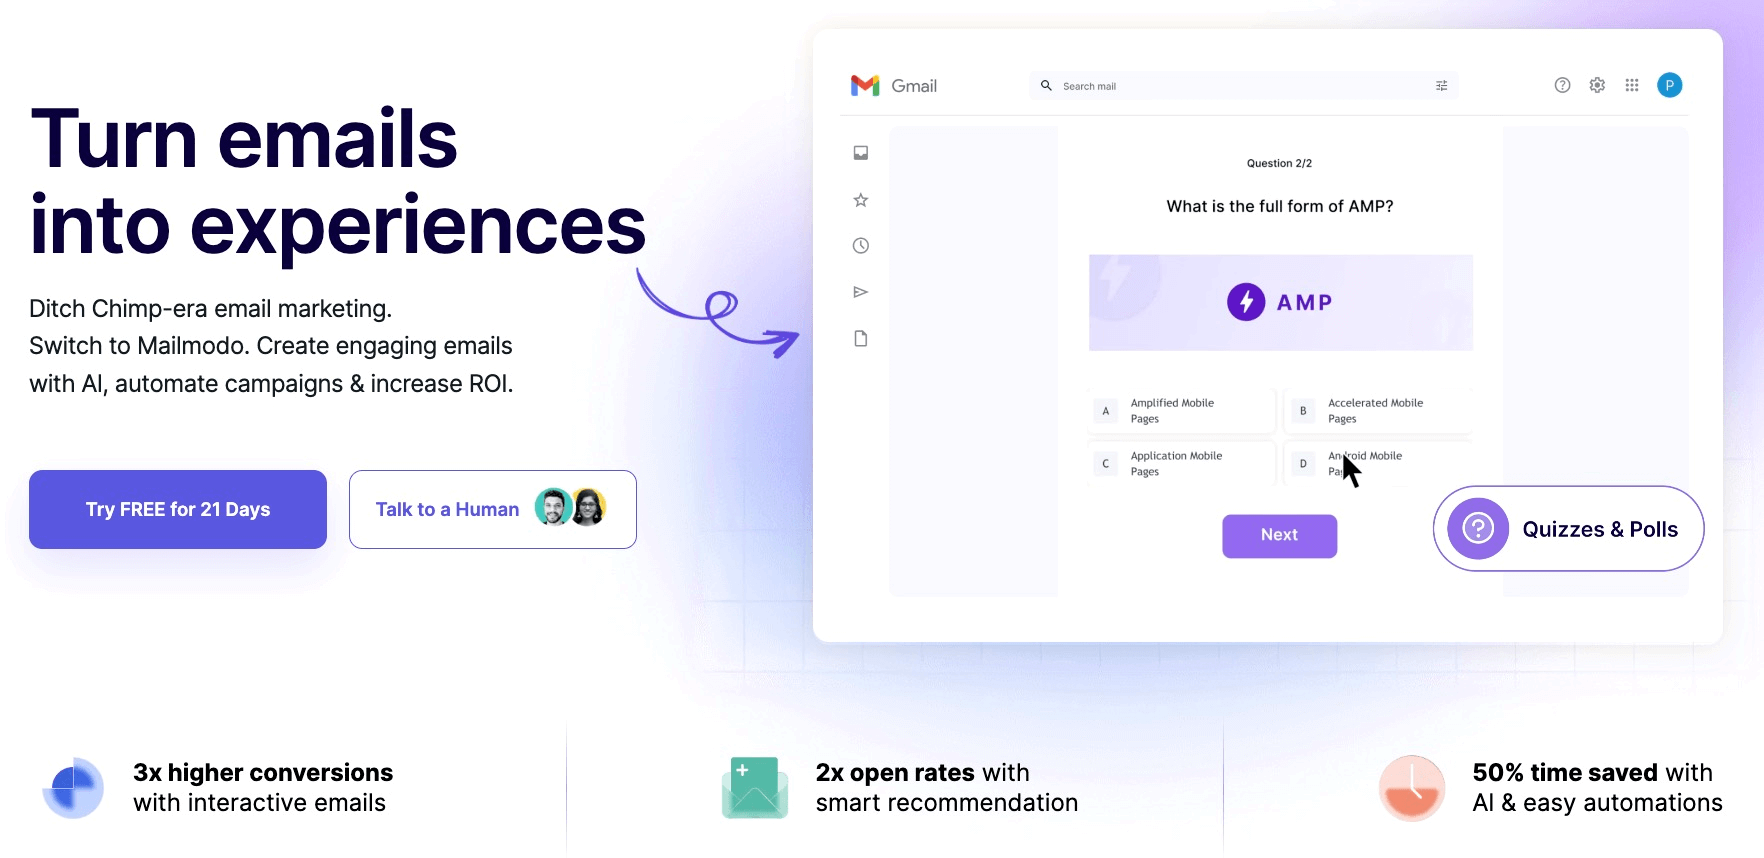 Mailmodo's front page slogan invites visitors to “turn emails into experiences” by employing AI to create engaging emails